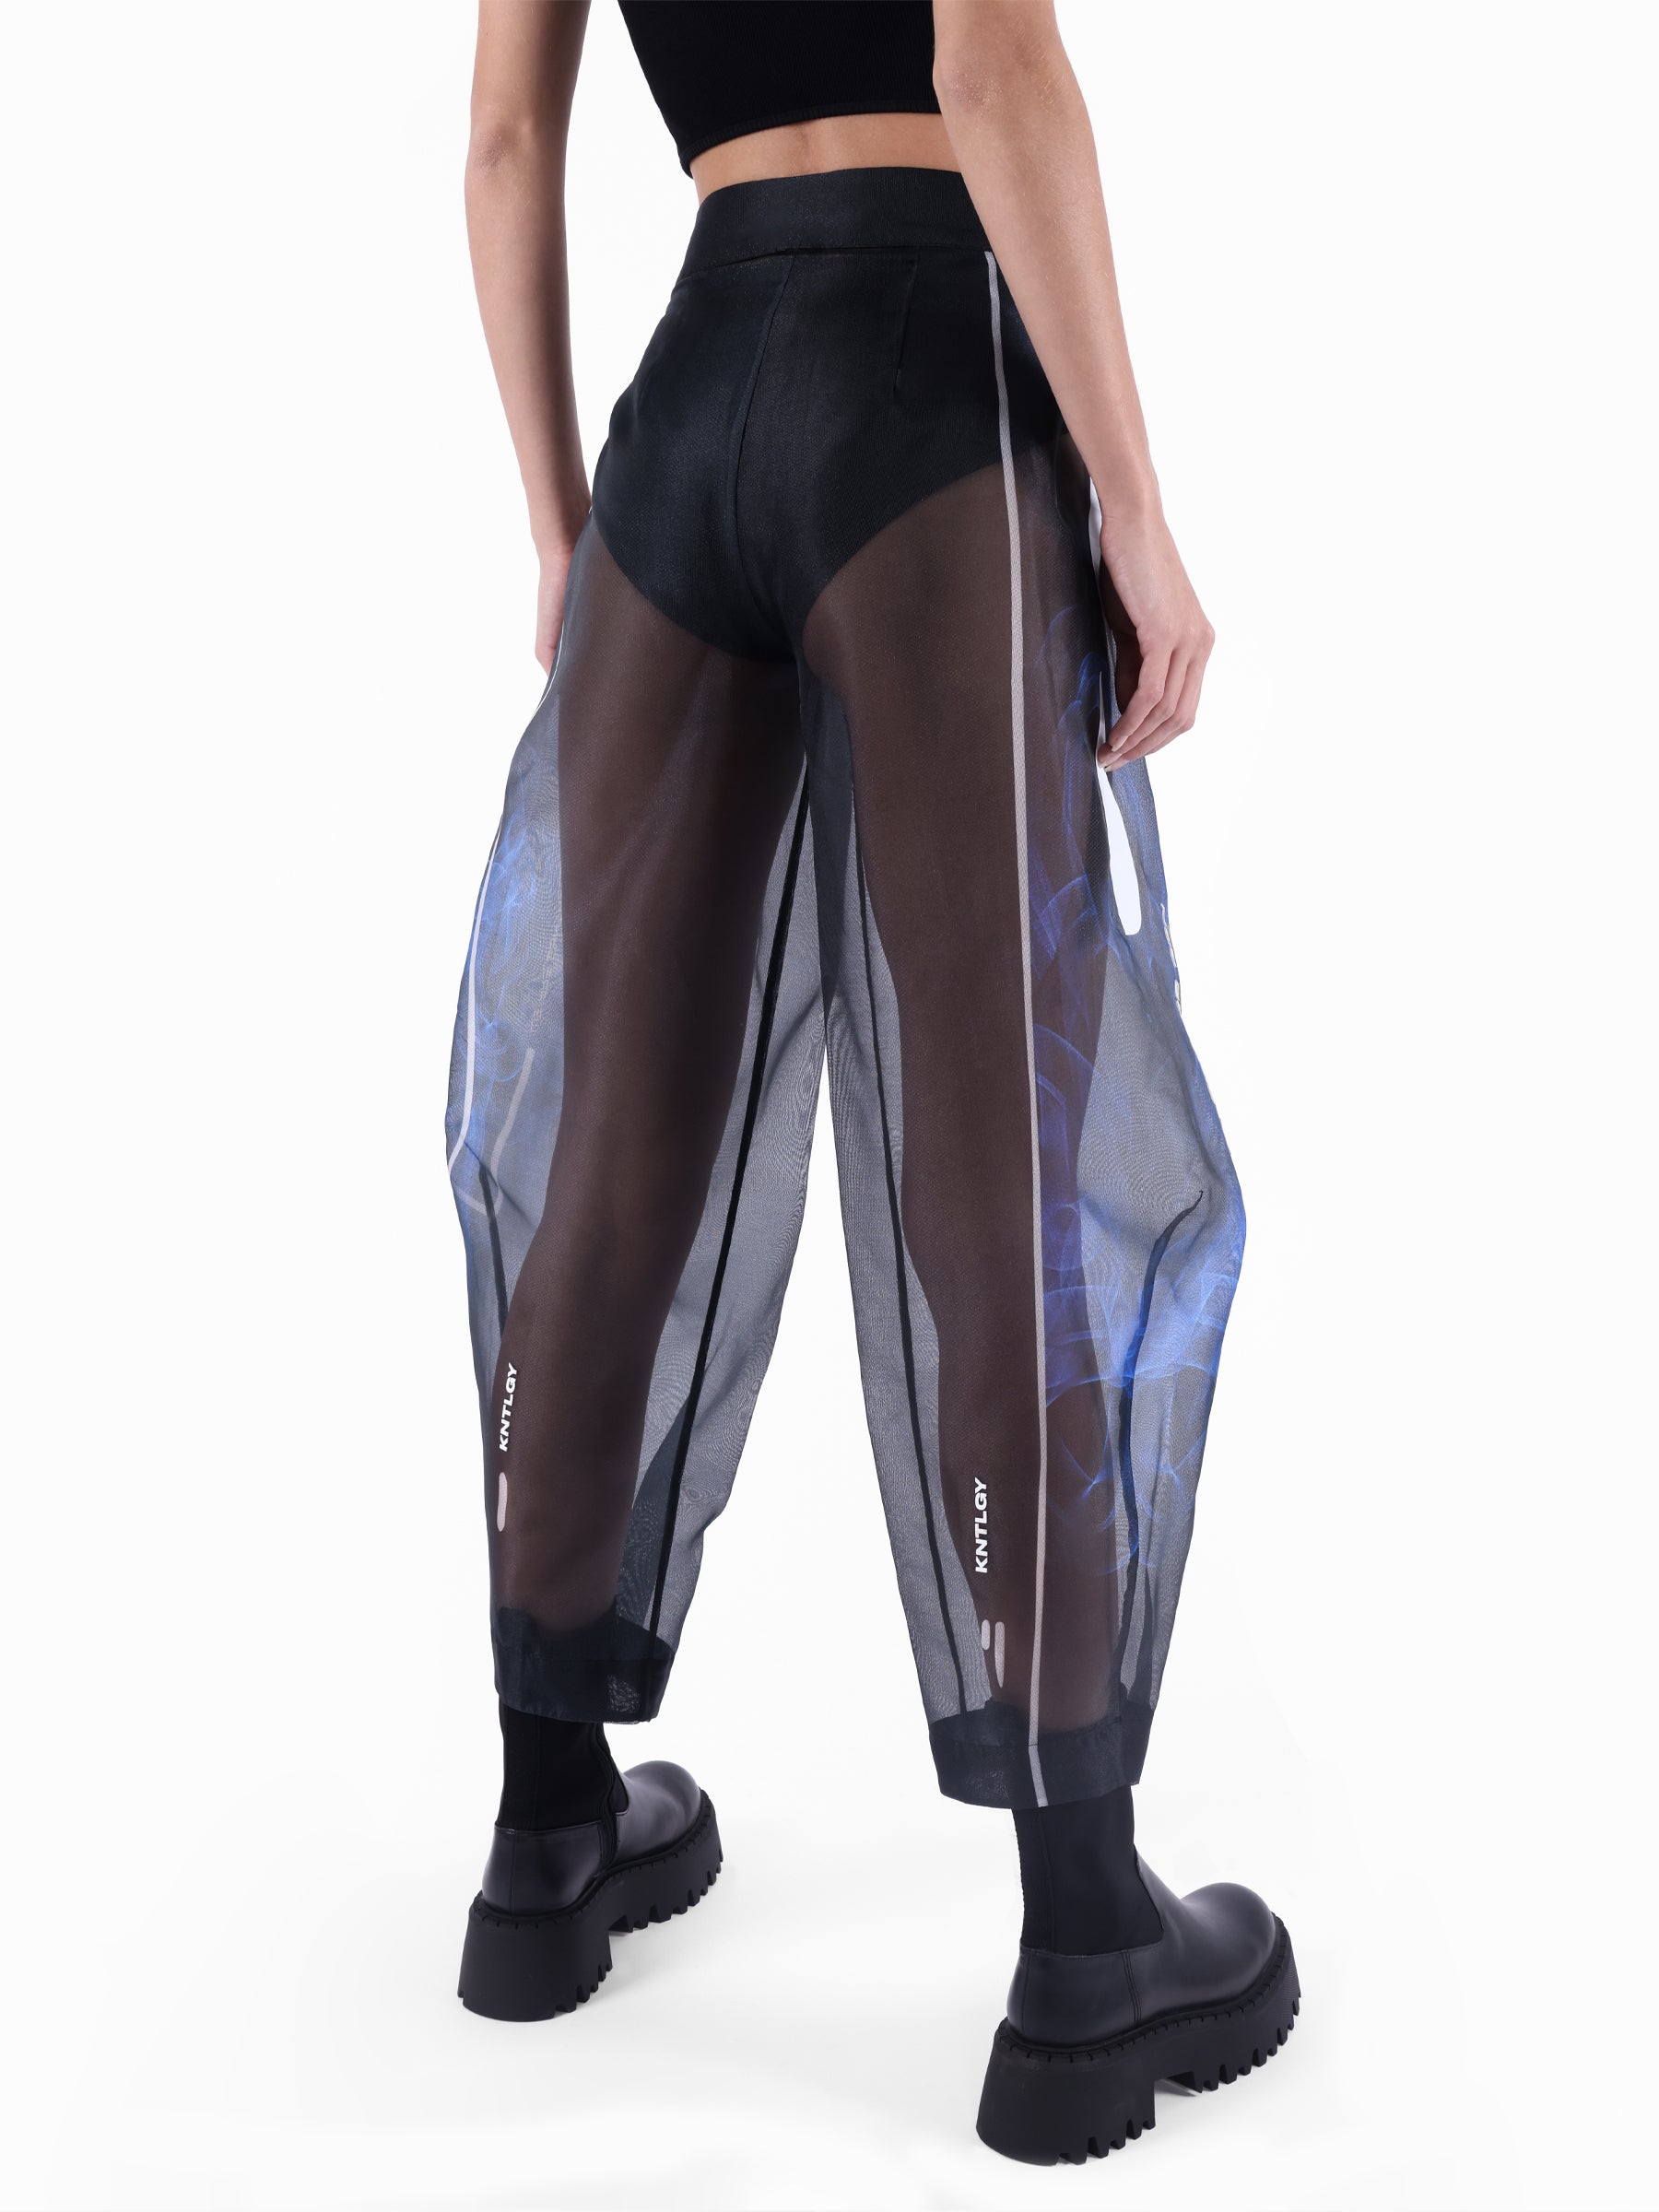 KNTLGY Super Woman Limited Edition Black Organza Pants with AI Print